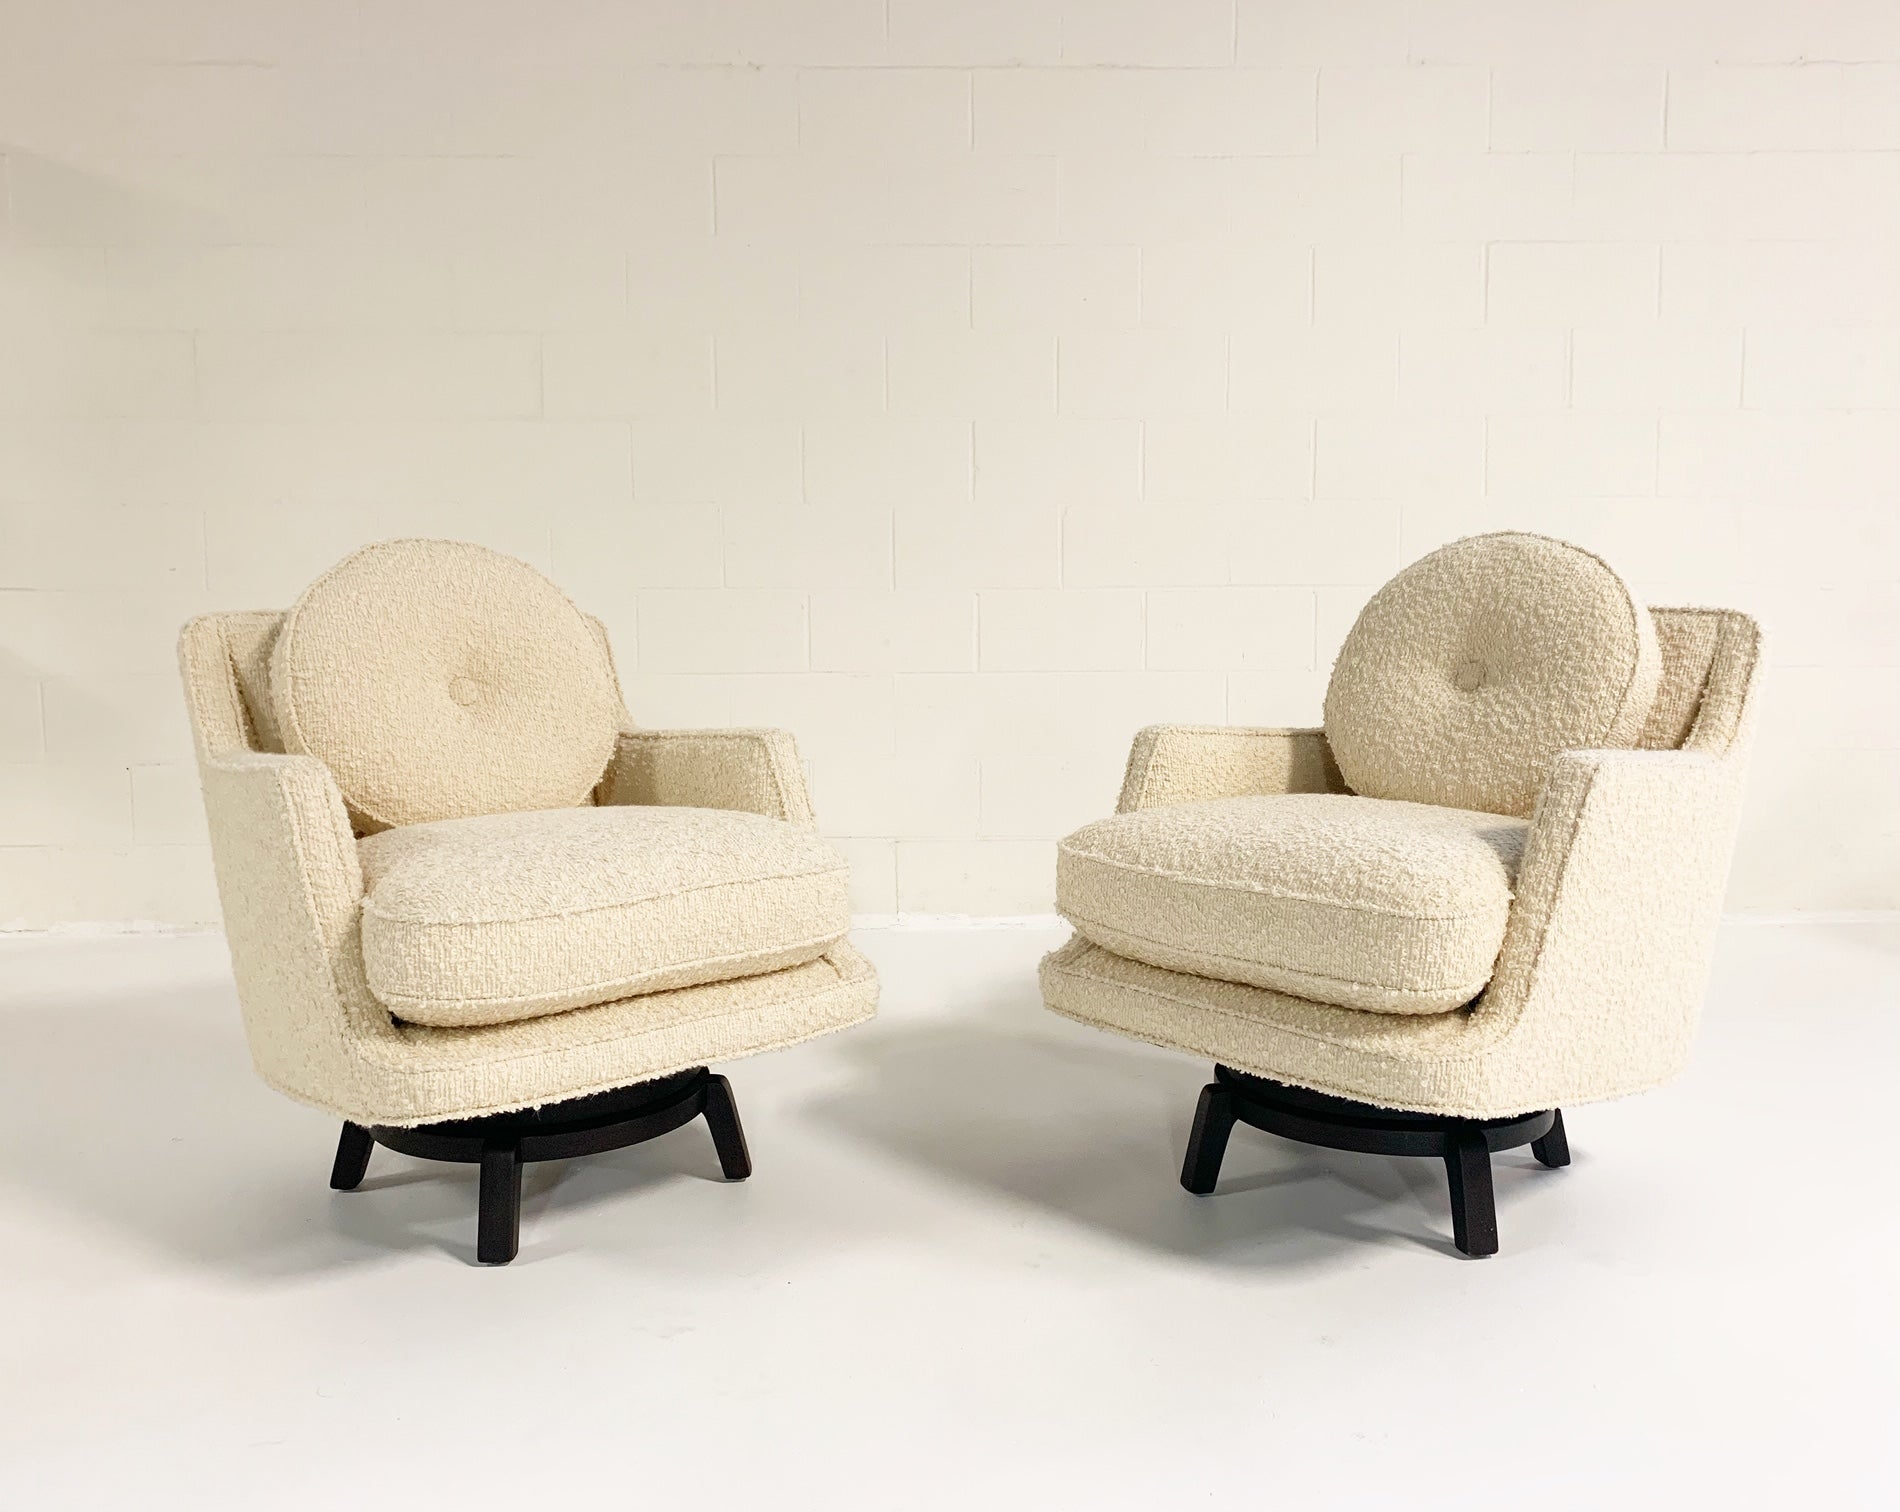 Model 5609 Swivel Lounge Chairs in Schumacher Boucle, Pair - FORSYTH